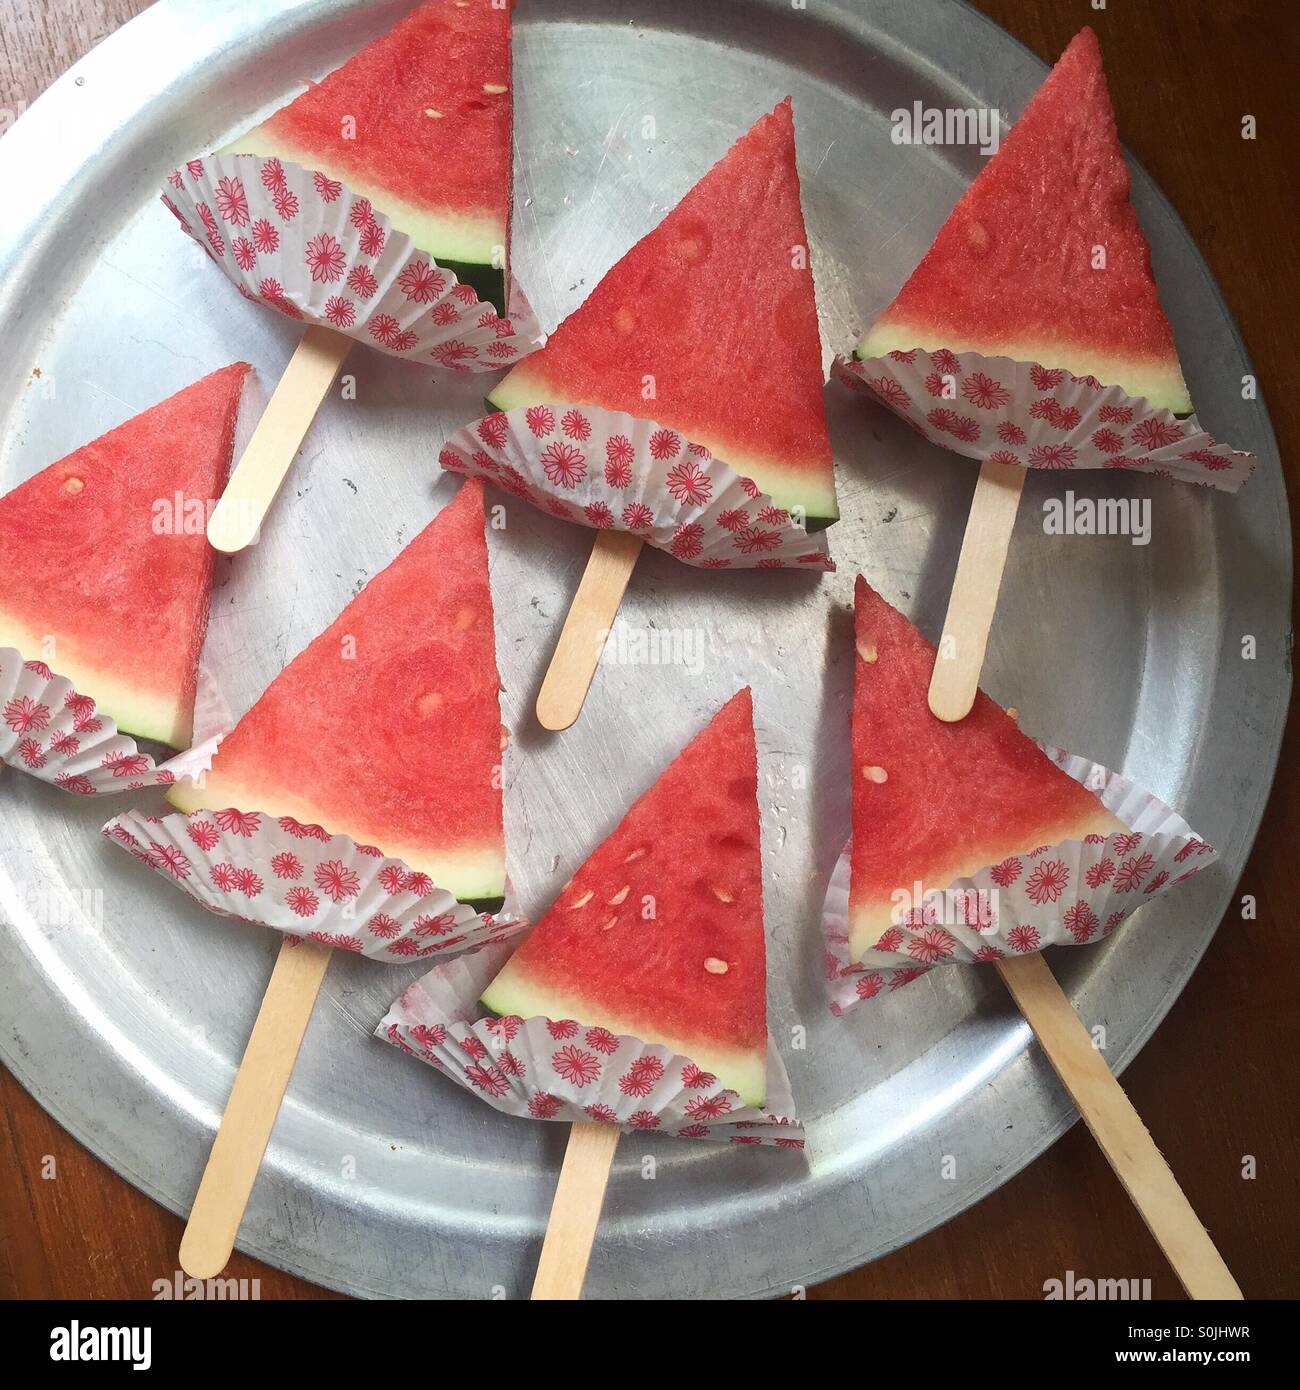 watermelon slices for party Stock Photo